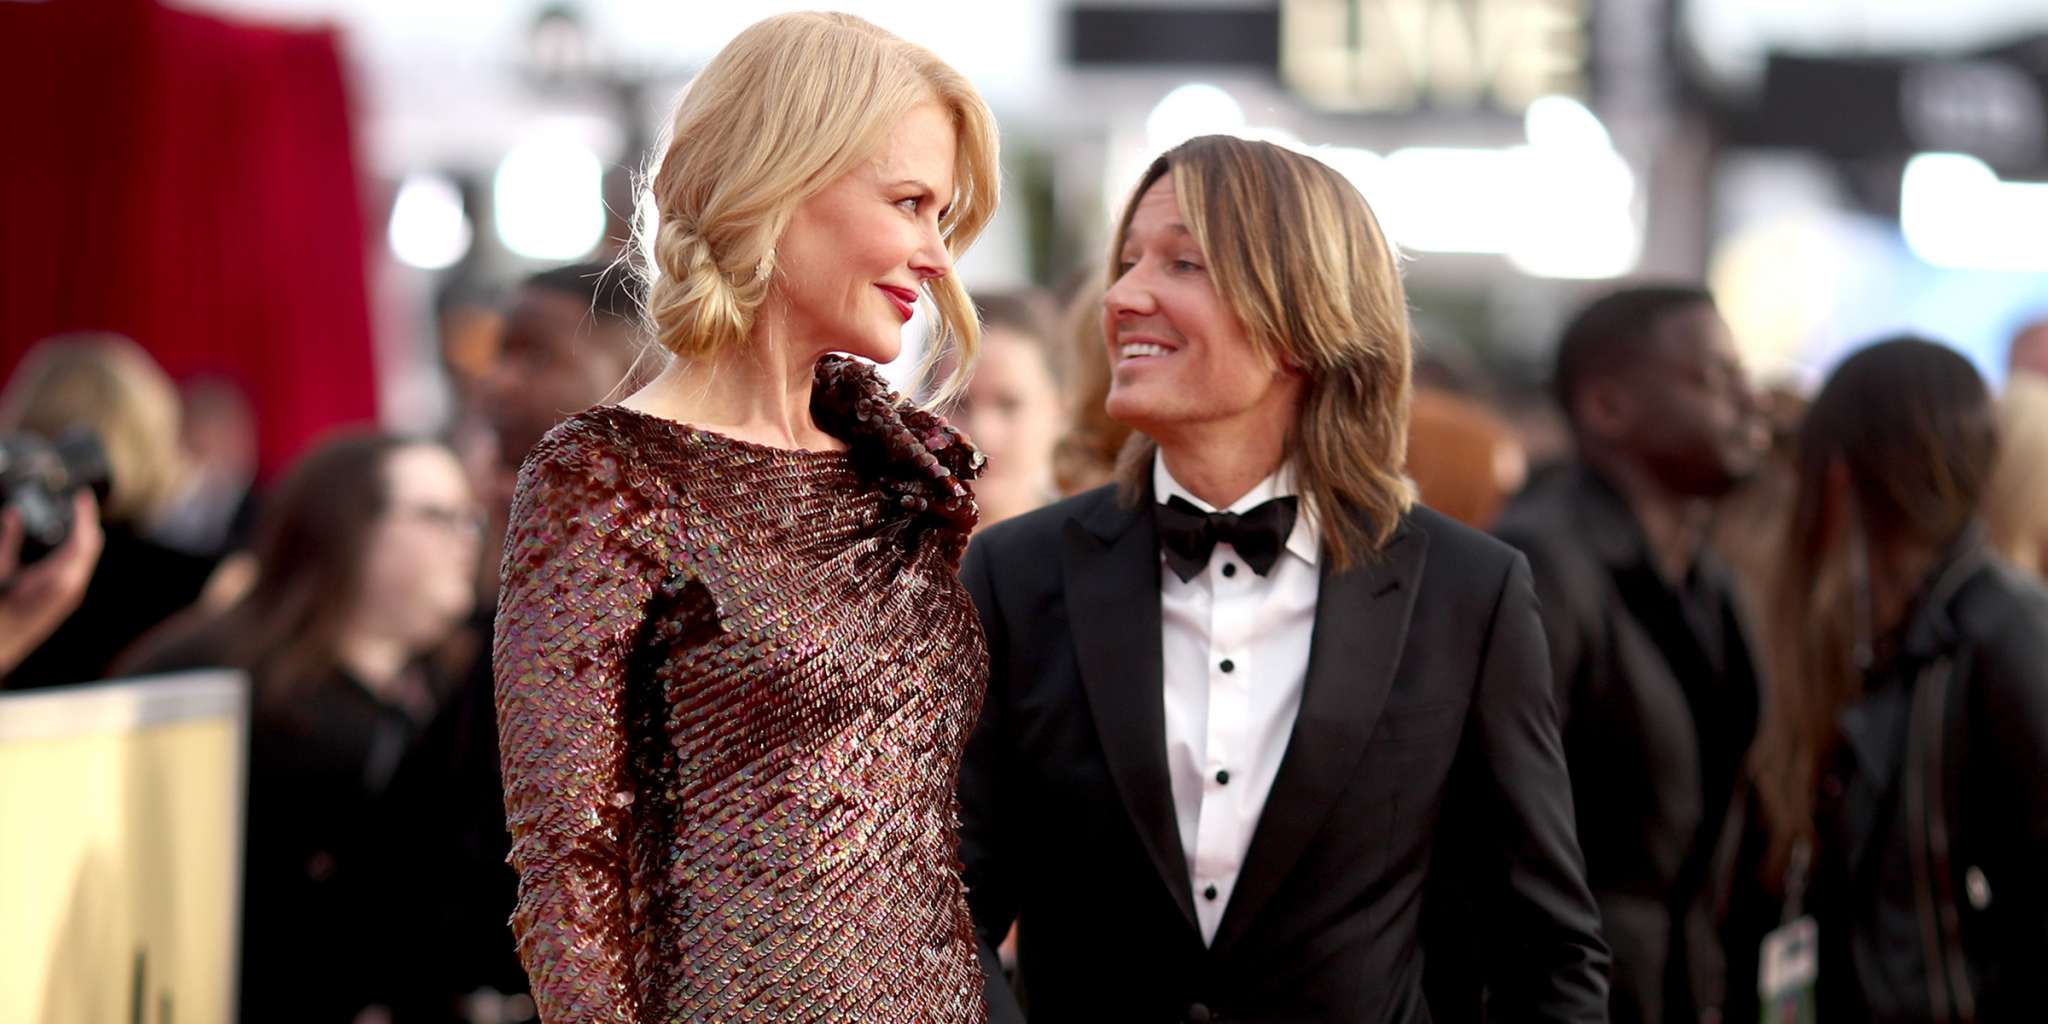 nicole-kidman-and-keith-urban-celebrate-16th-wedding-anniversary-posting-a-beautiful-picture-on-instagram